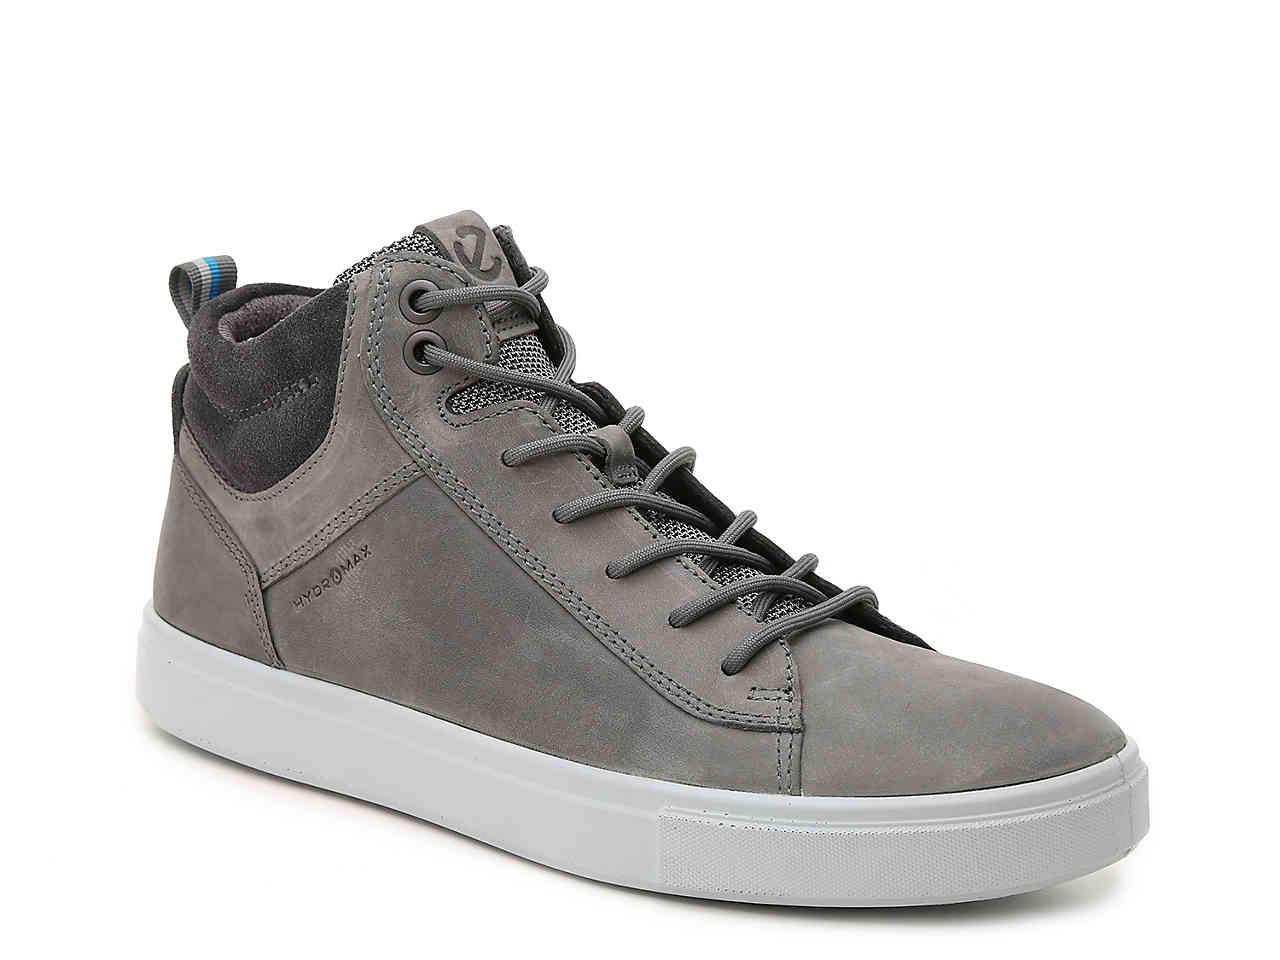 Ecco Leather Kyle High-top Sneaker in Grey (Gray) for Men - Lyst